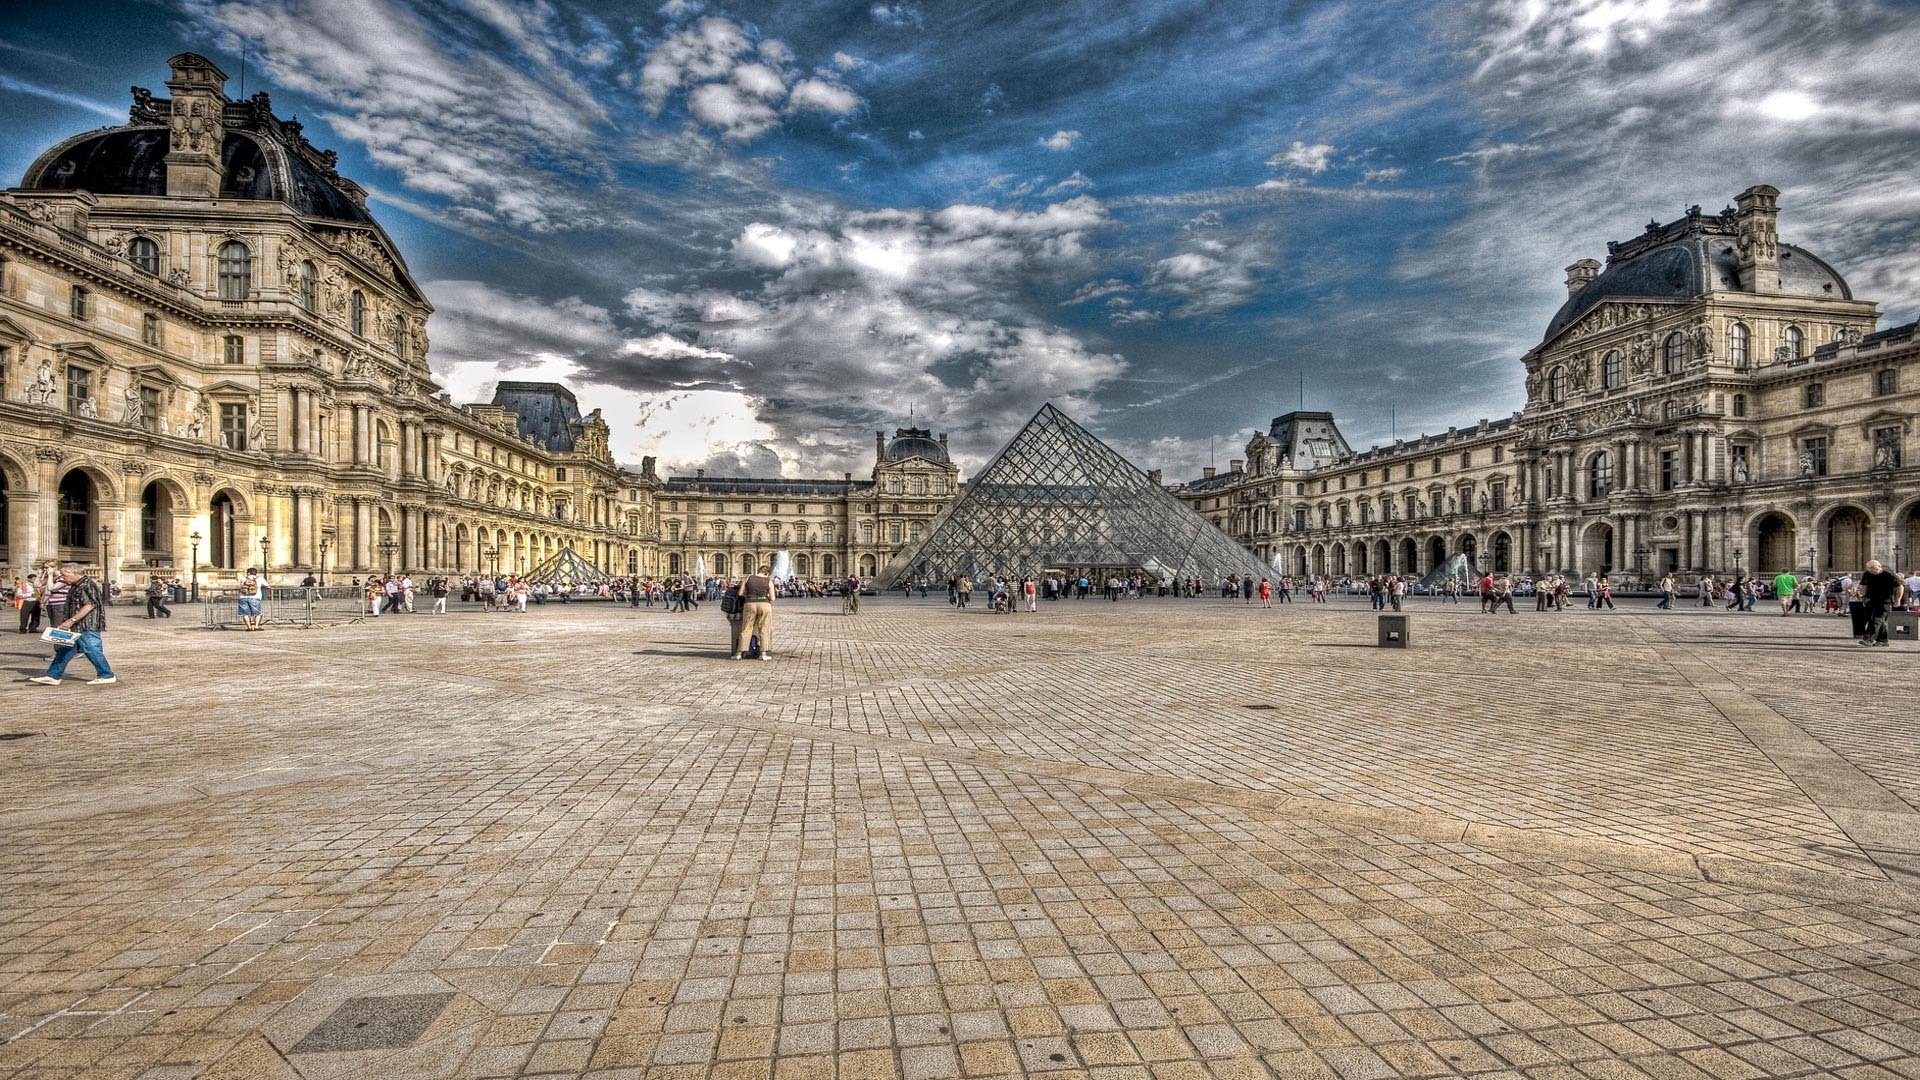 Paris: Louvre Museum, The home of some of the best-known works of art, including the Mona Lisa and the Venus de Milo. 1920x1080 Full HD Background.